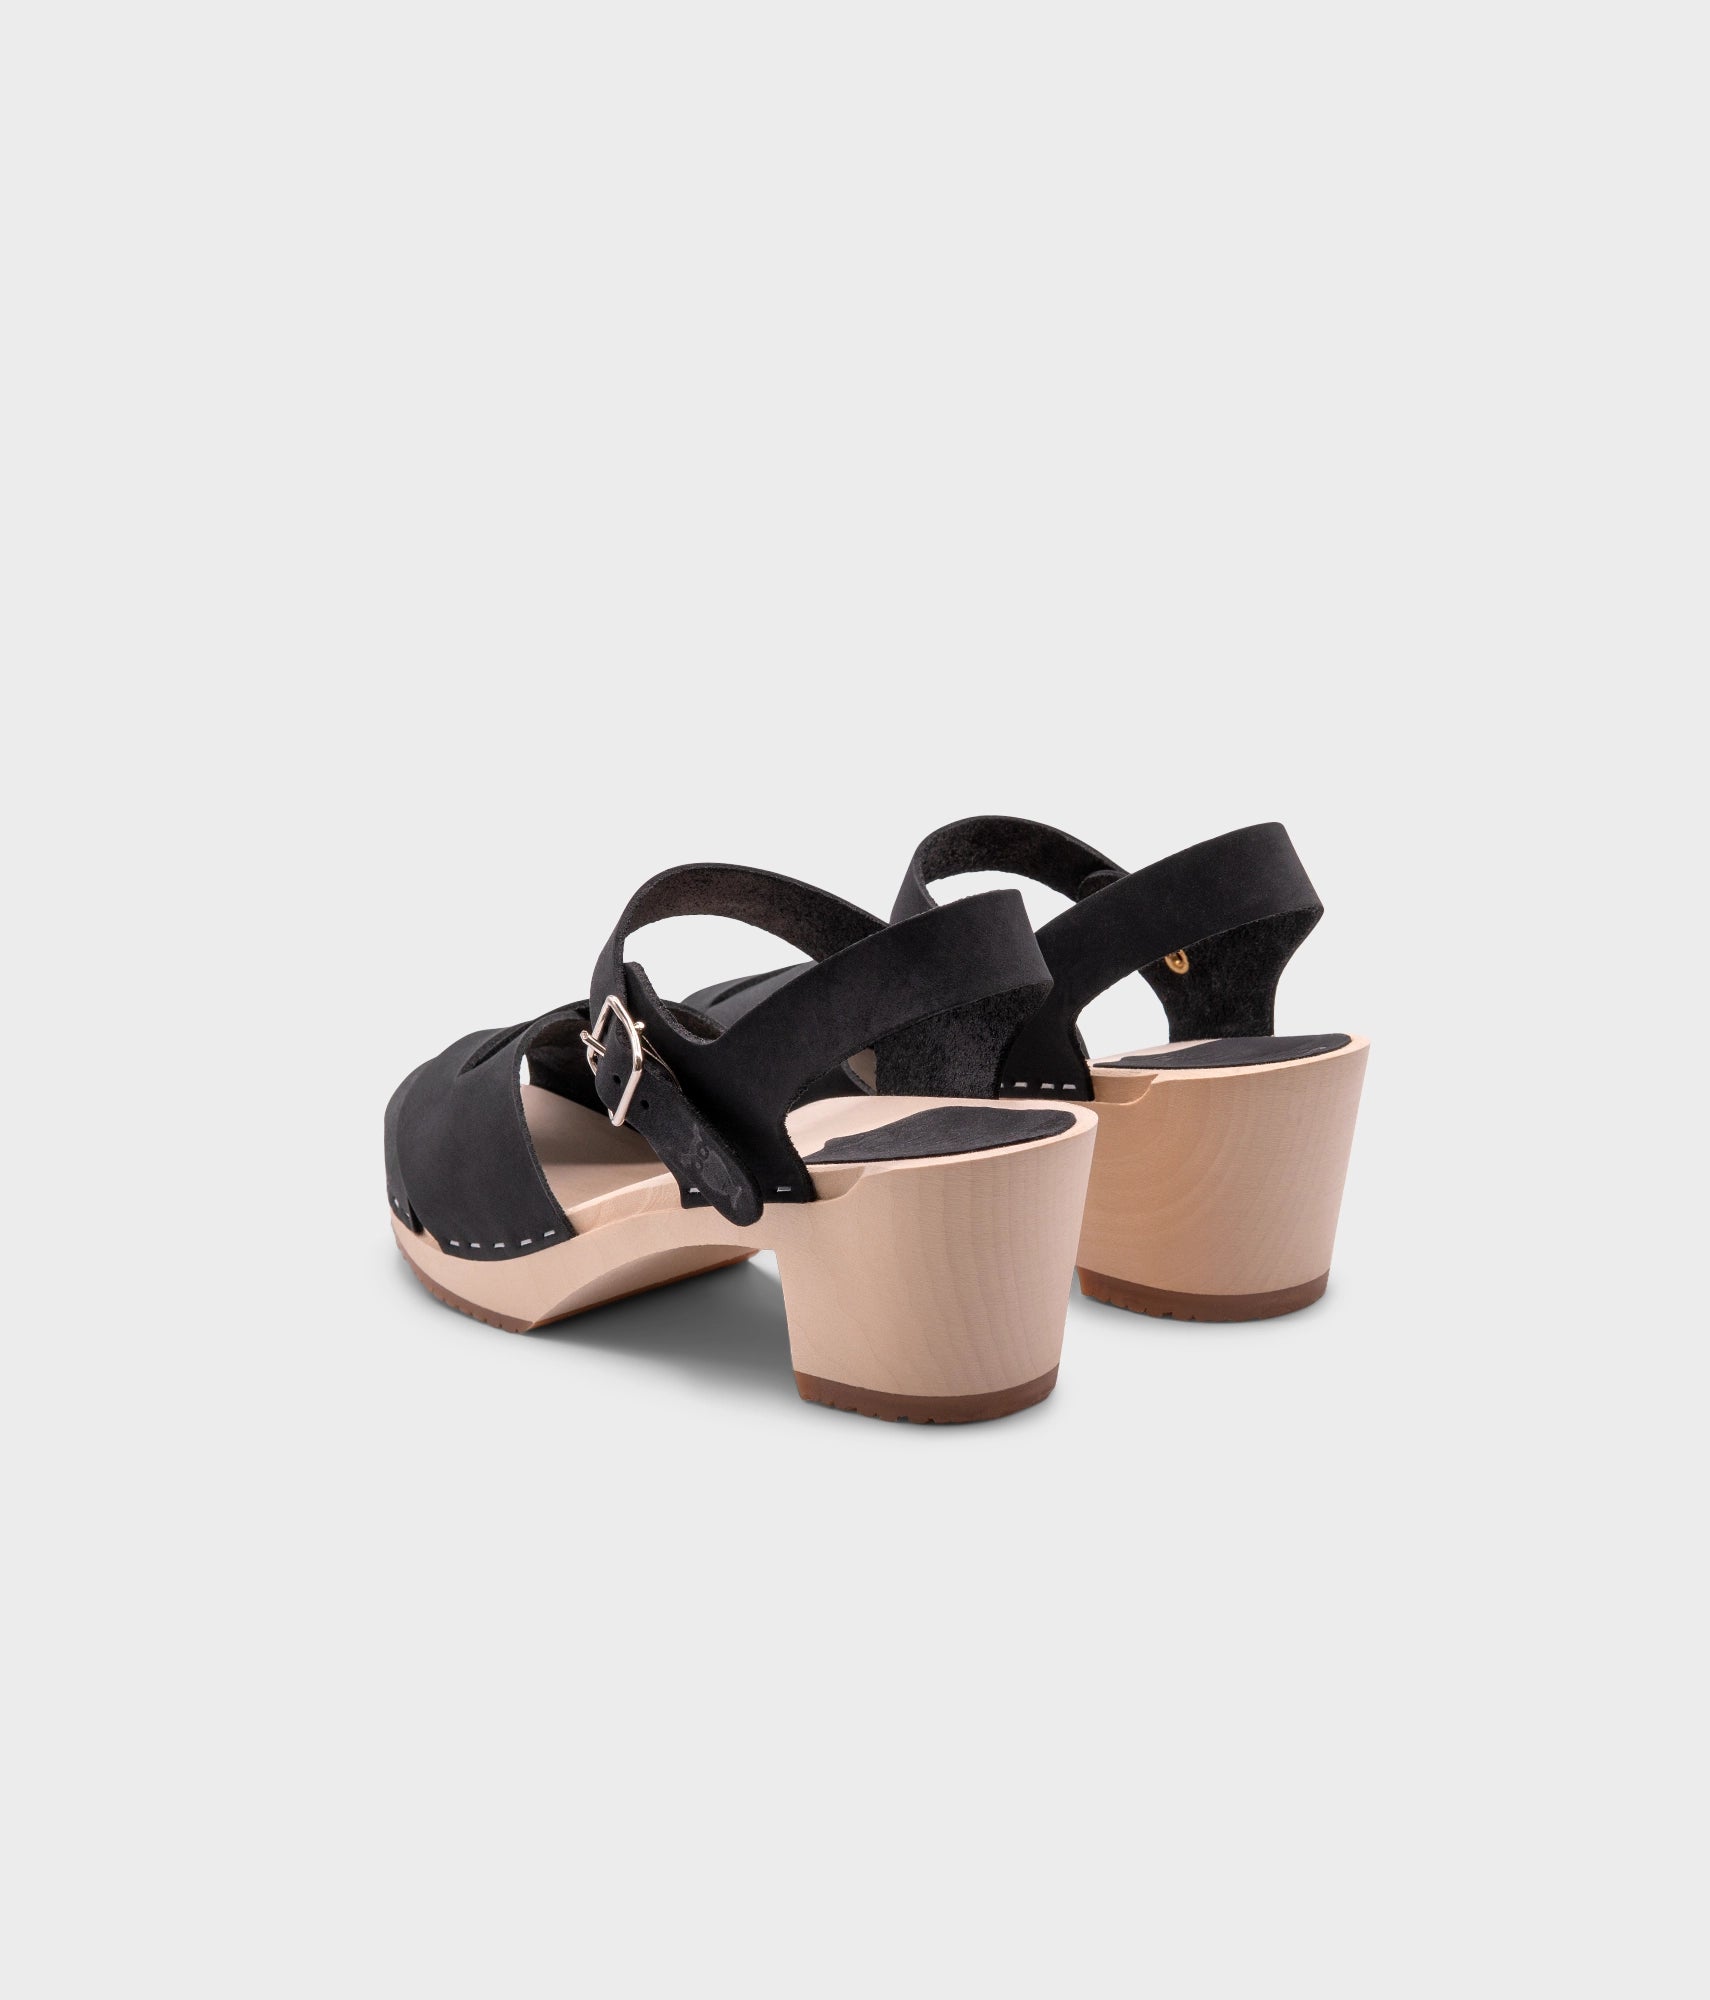 high heeled clog sandals in black nubuck leather with an open-toe stapled on a light wooden base